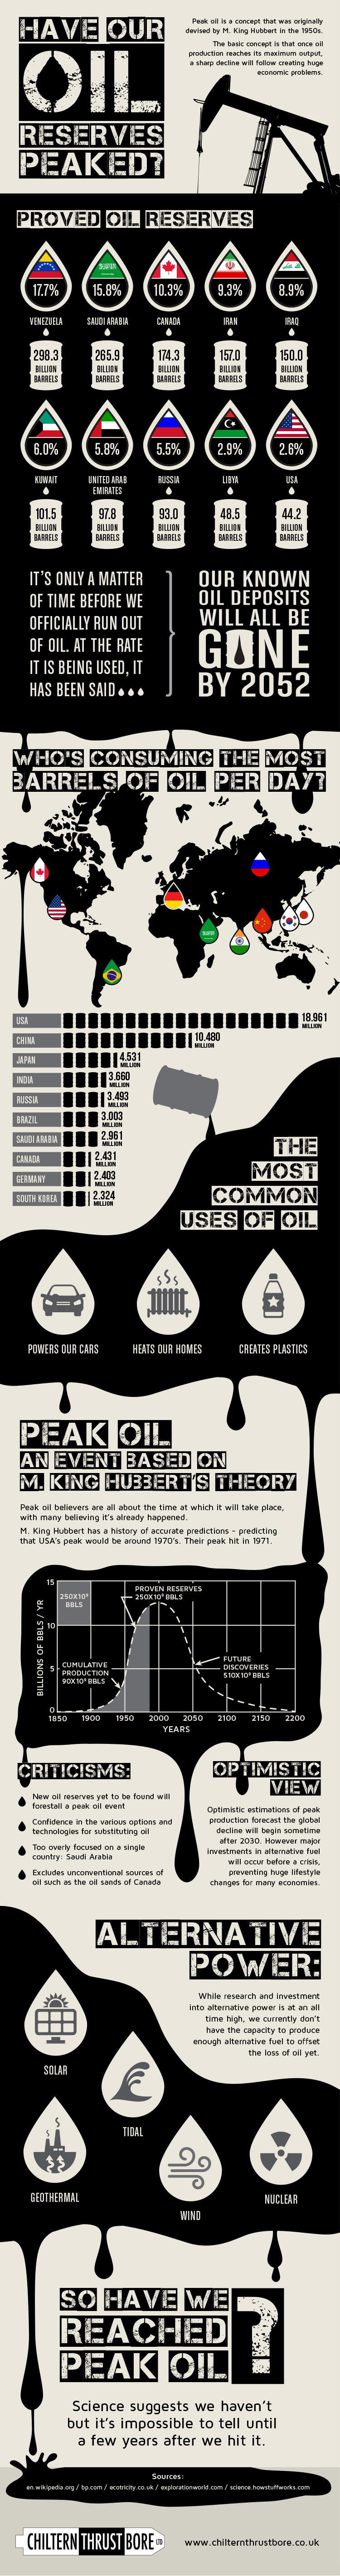 Have Our Oil Reserves Peaked? (Infographic)